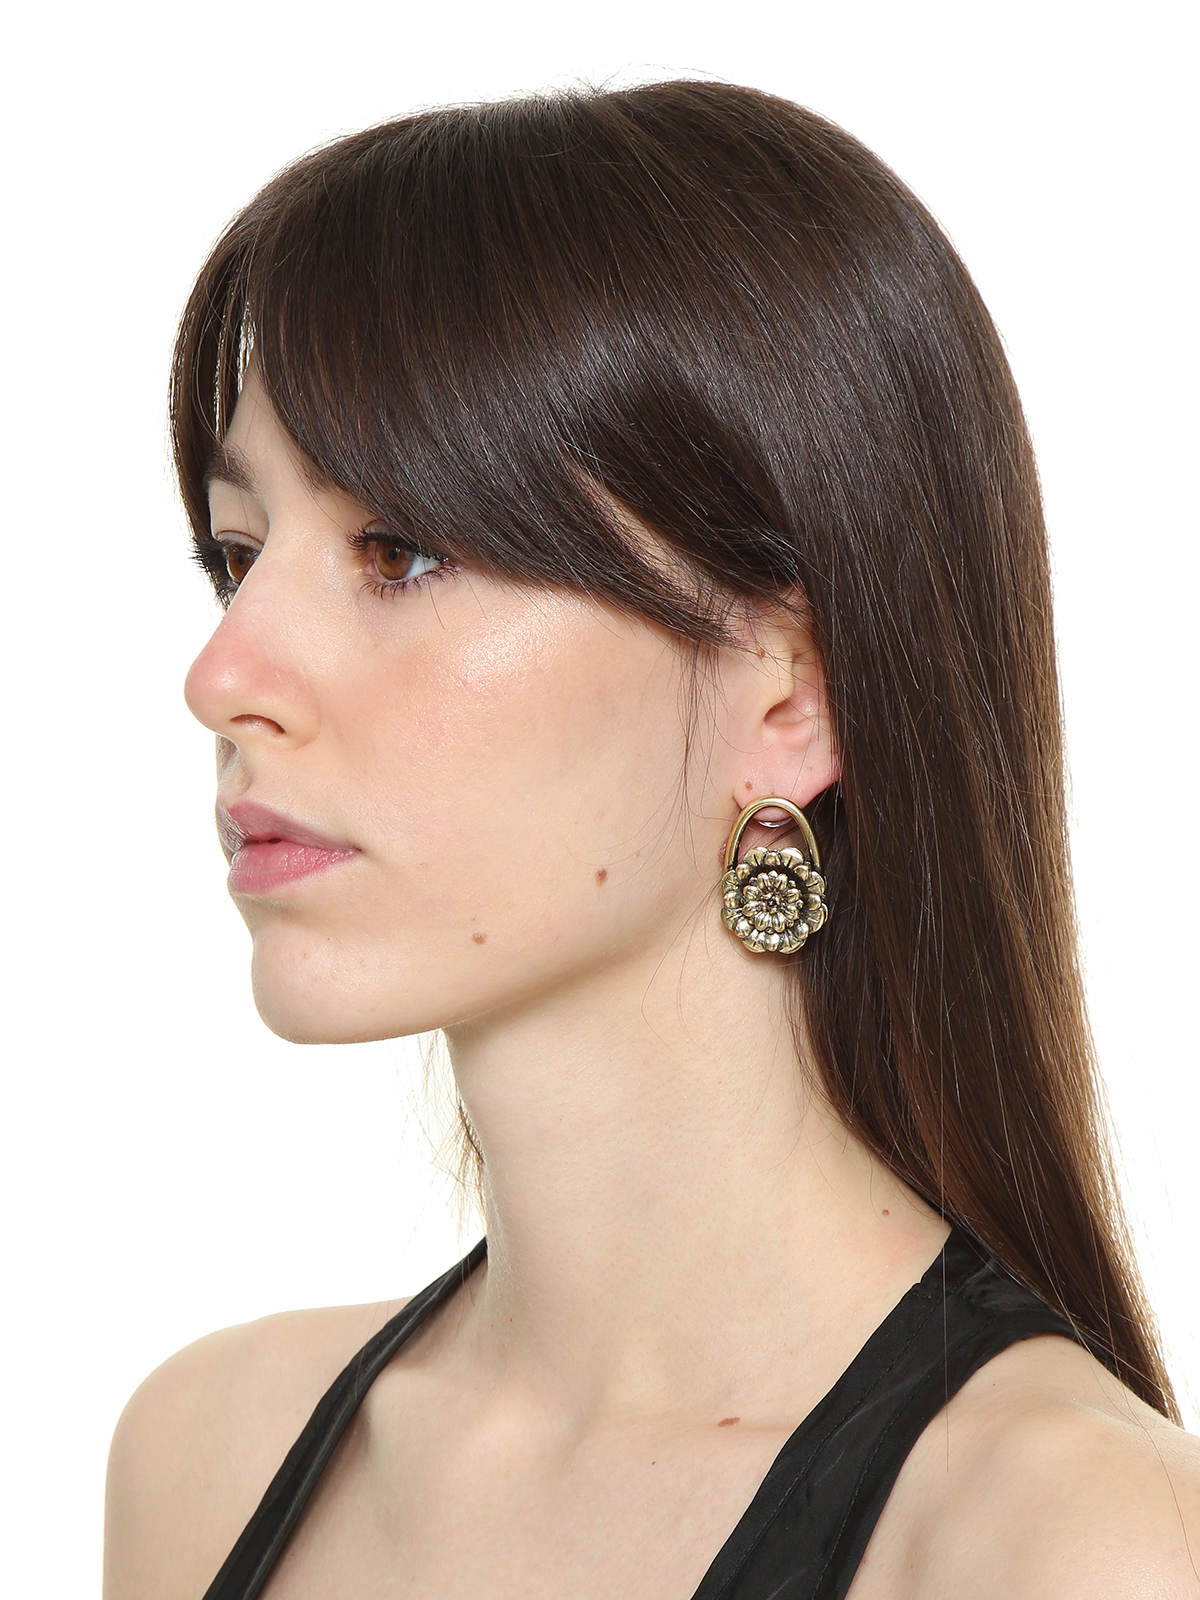 Oval earrings embellished with metal flower